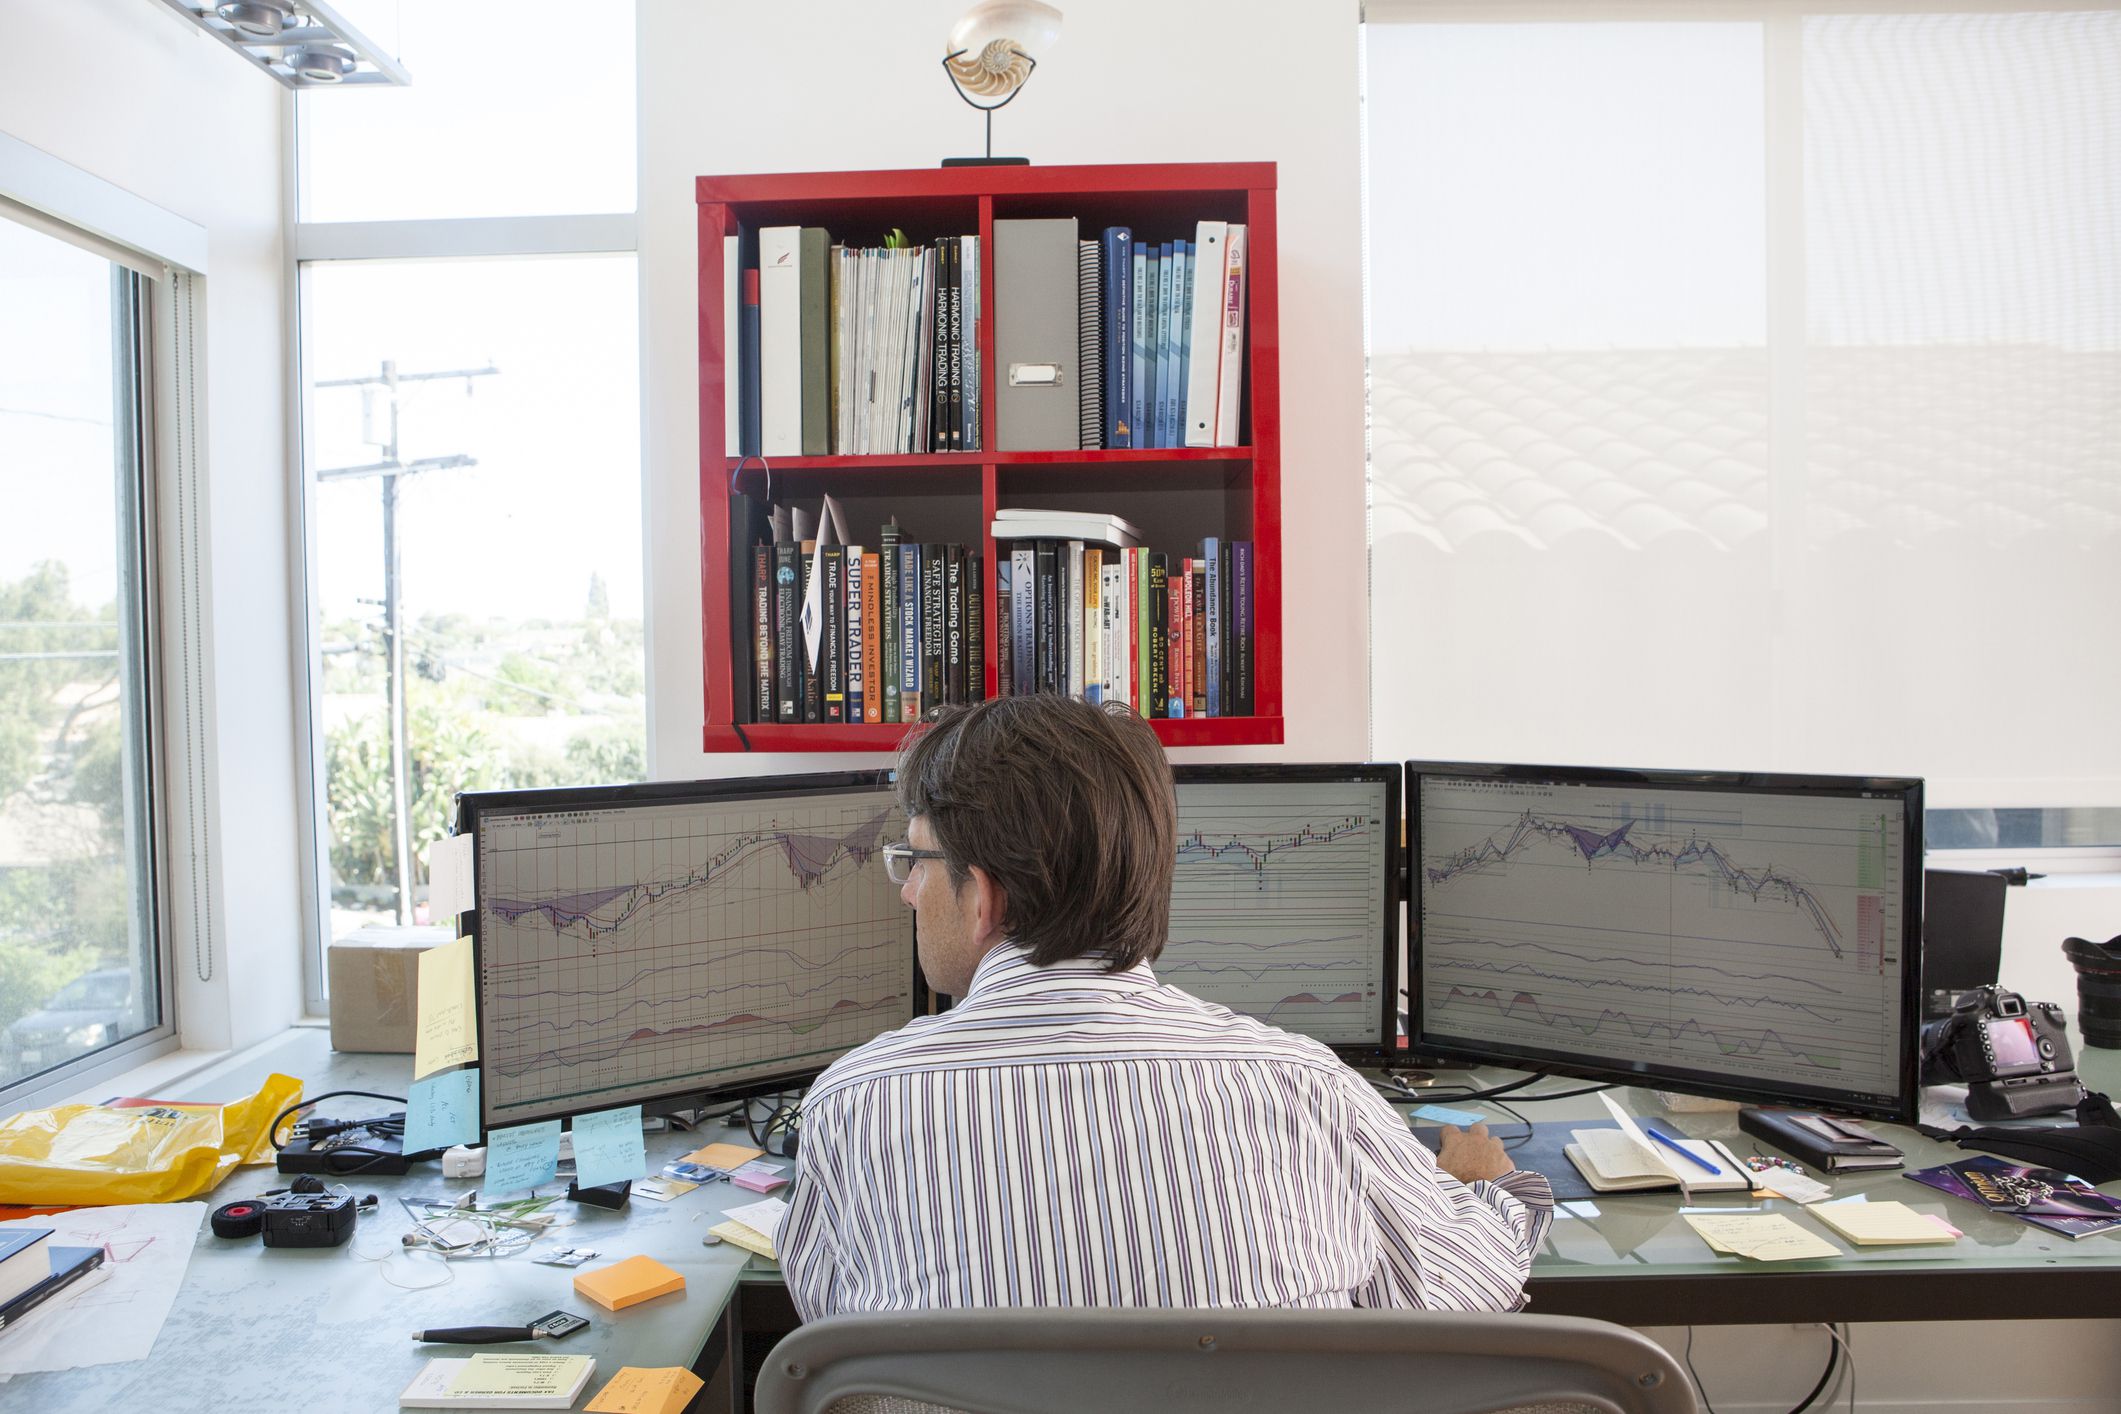 5 Tips To Researching a Stock Trade Before Investing